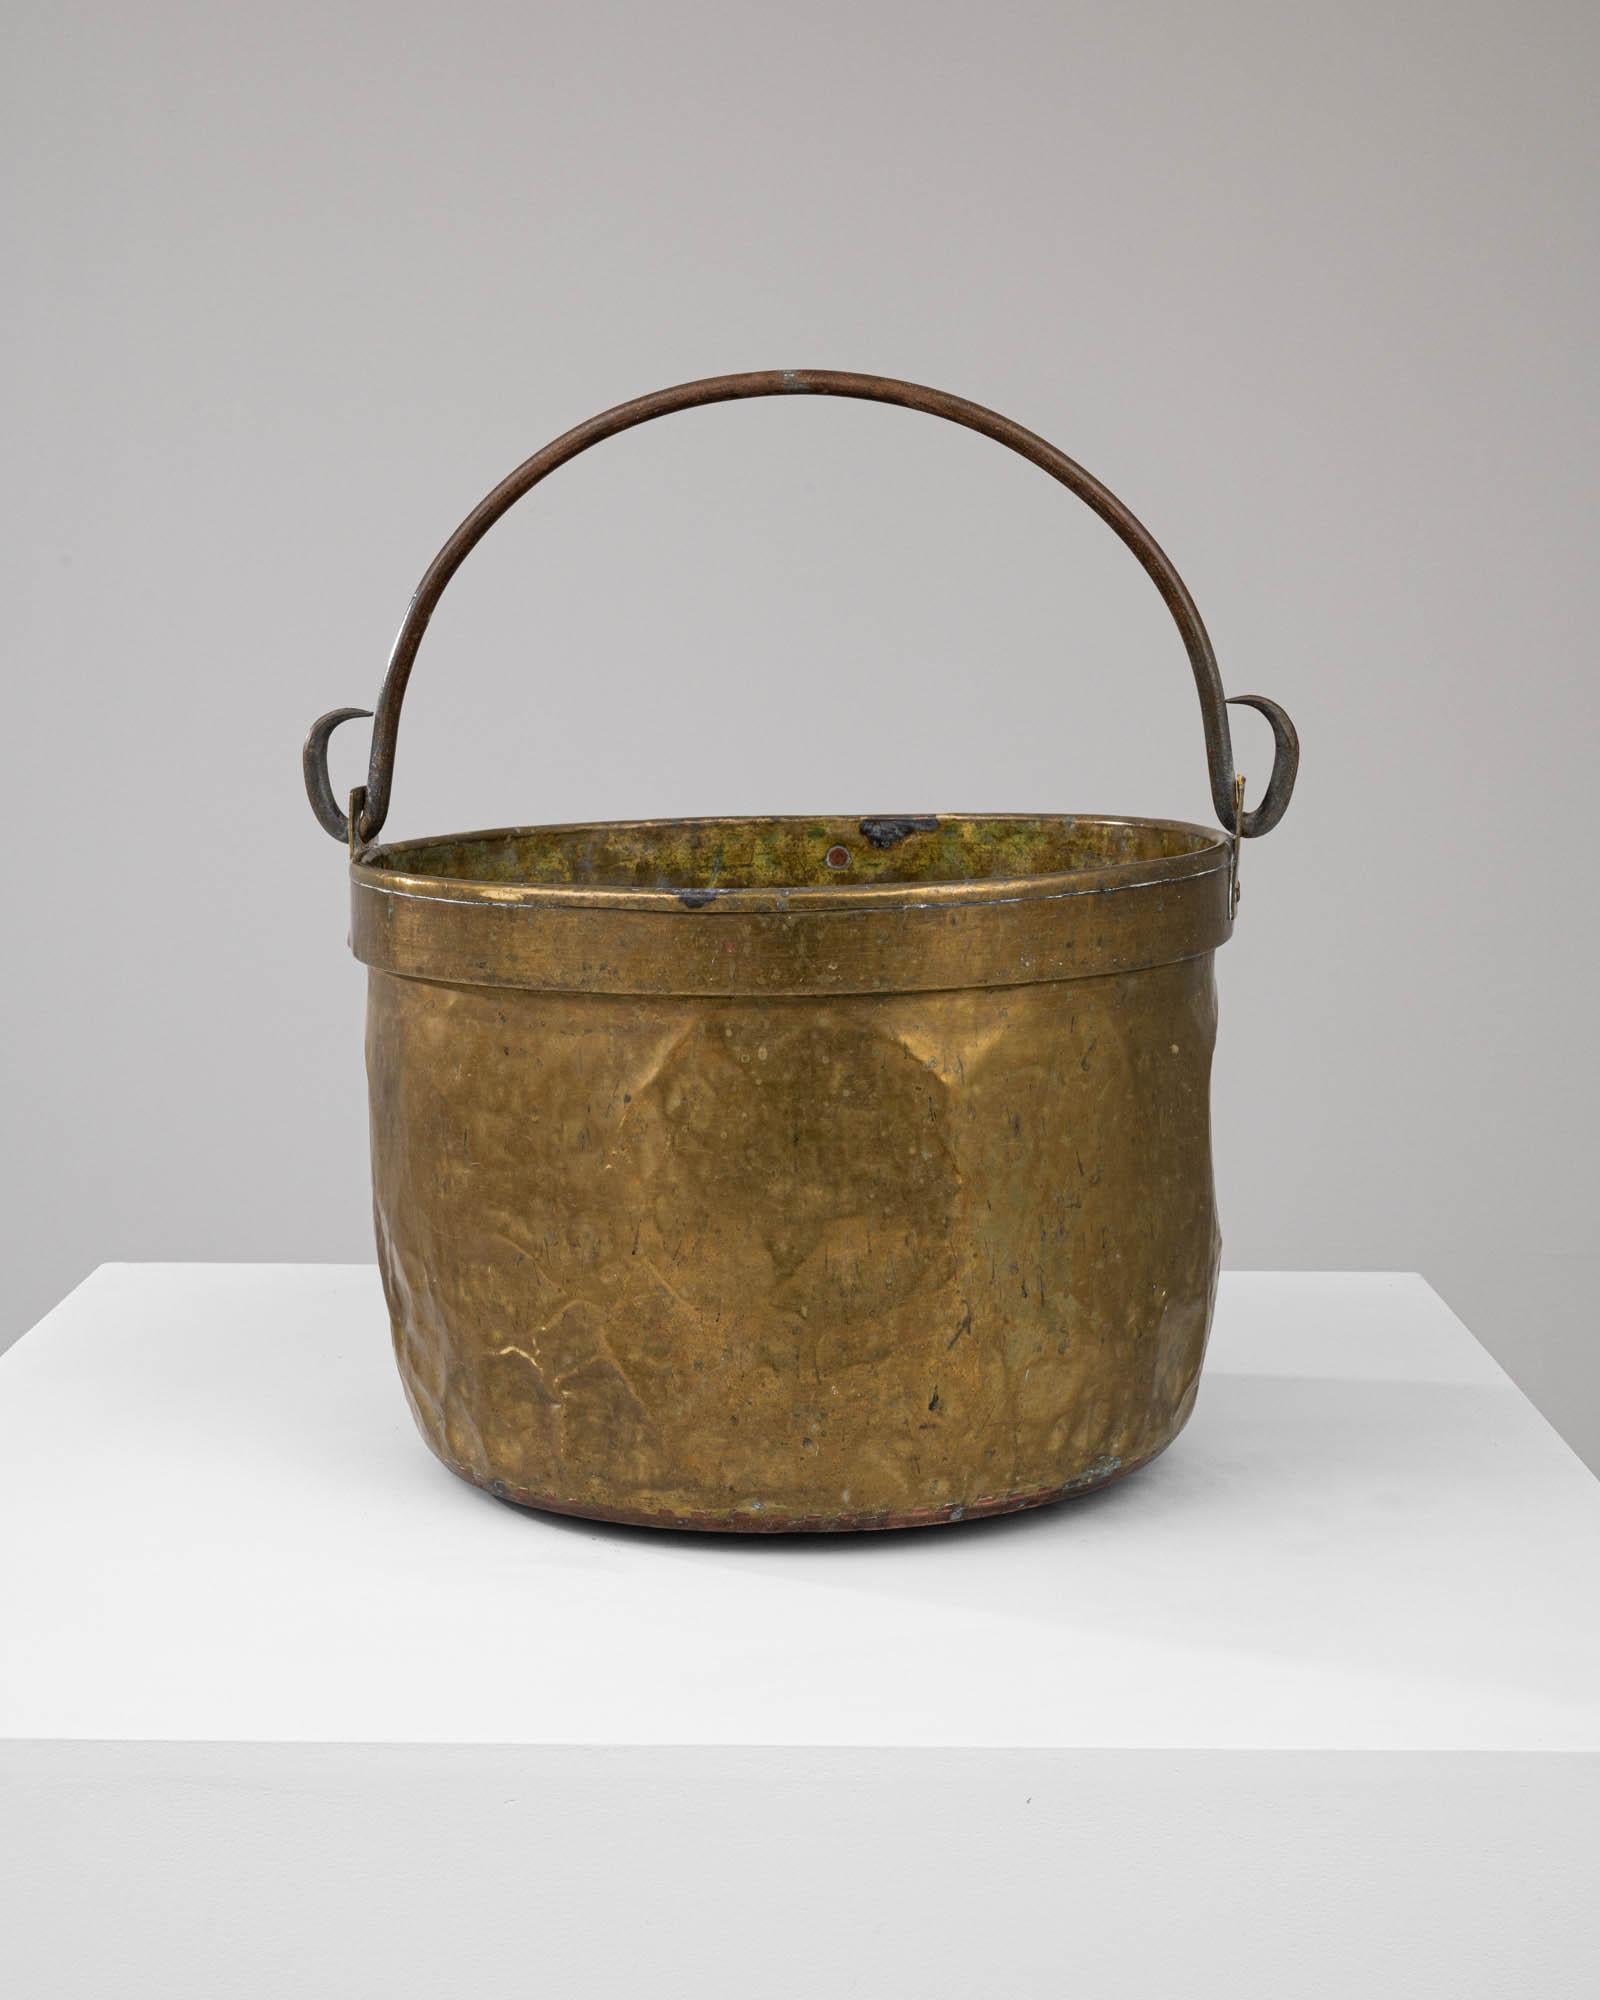 This Early 19th Century French Brass Bucket, with its full, rounded body and distinguished patina, is a striking example of traditional craftsmanship. The bucket, made from brass, has developed a rich, textured surface over time, evocative of its